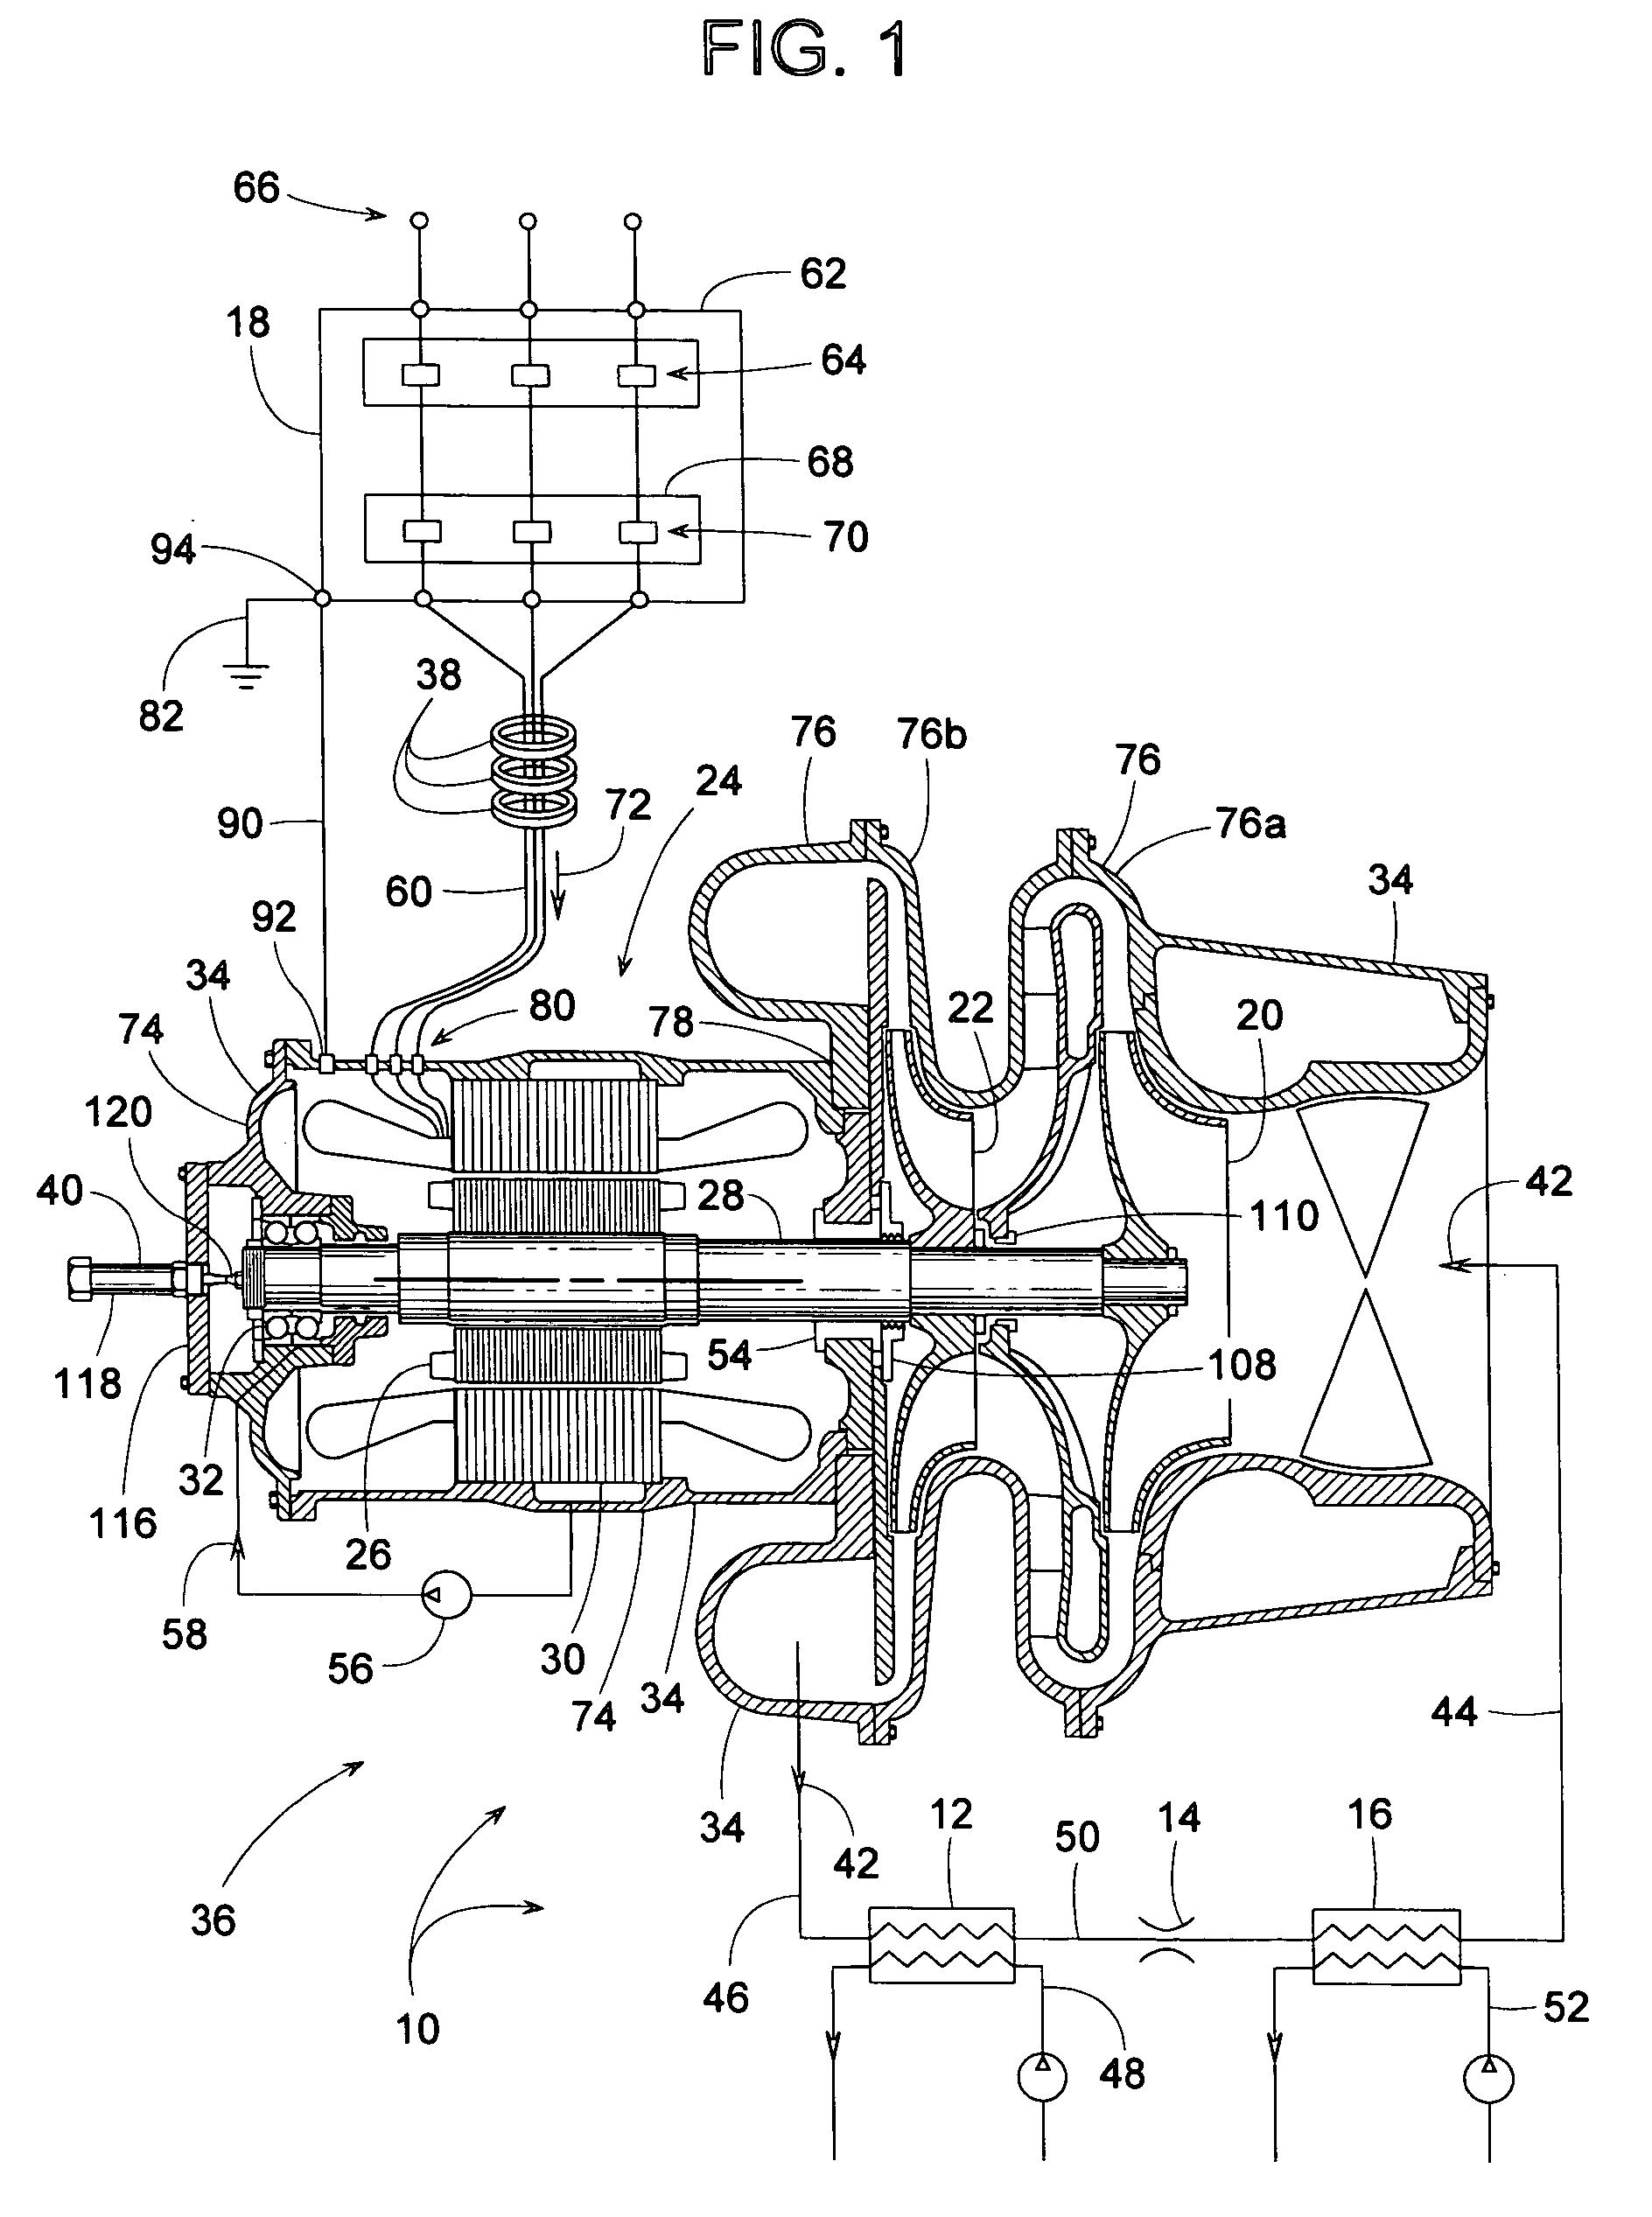 System for protecting bearings and seals of a refrigerant compressor